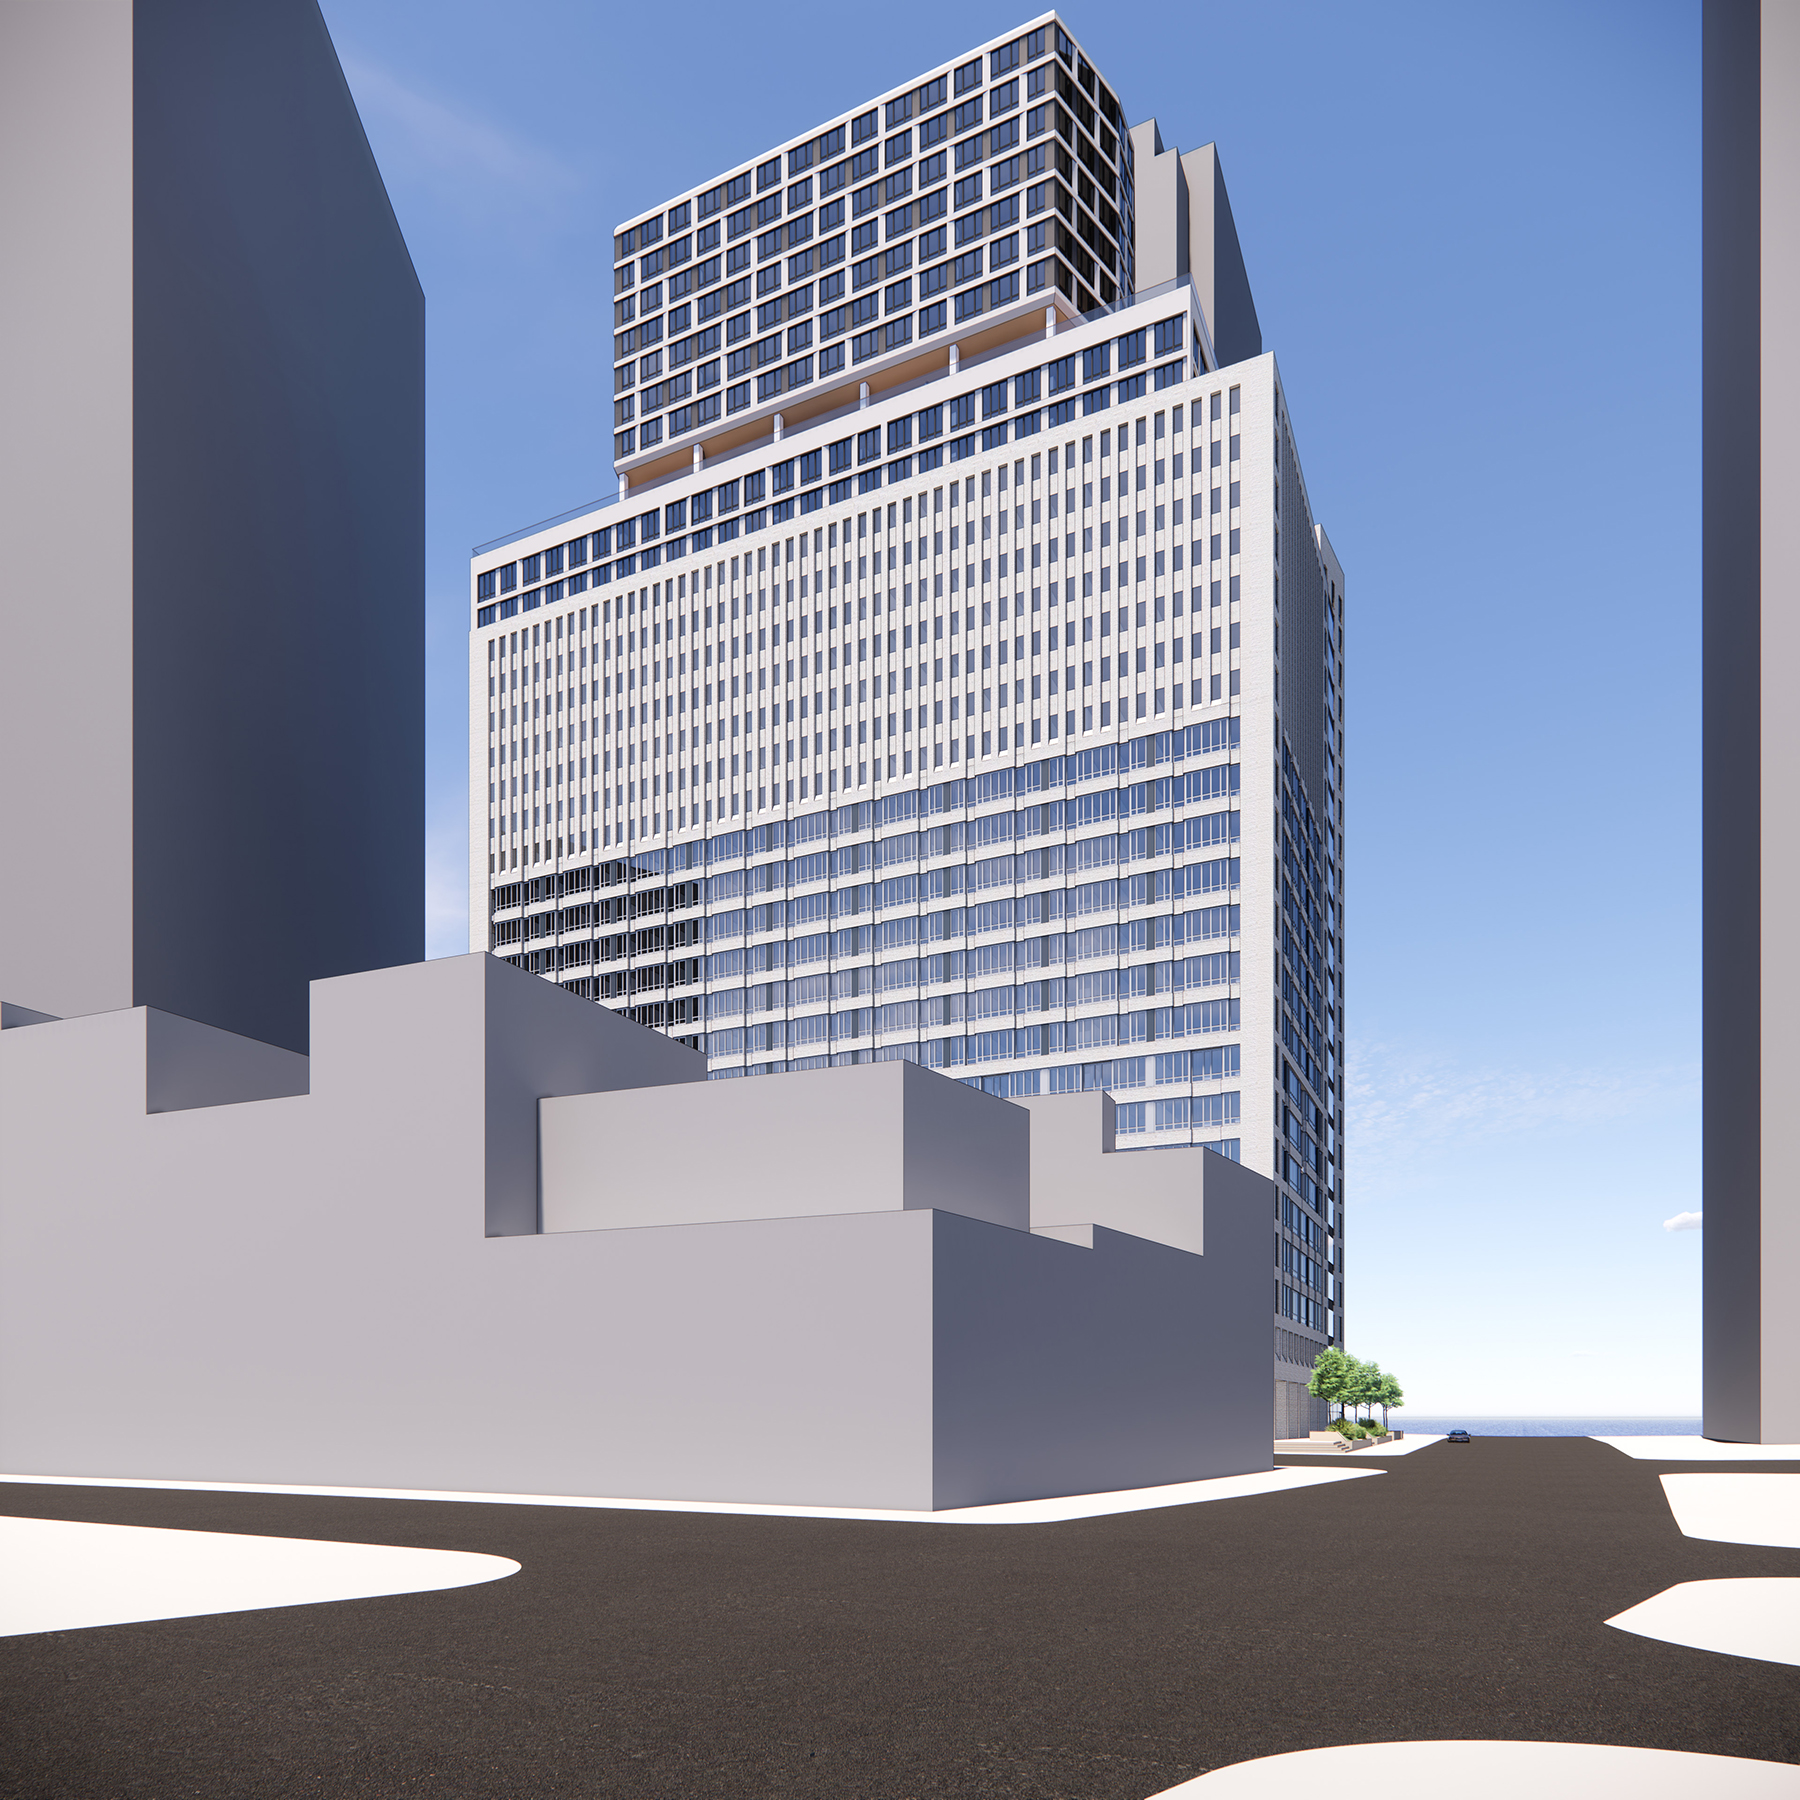 Among the modifications to be made to 25 Water Street to convert it from office to residential use, two courtyards will be cut into the center of the building to enable light and air to access the interior portions of the building. To make up for the lost floor space, 10 stories will be added to the top of the building. (Image courtesy of CetraRuddy)